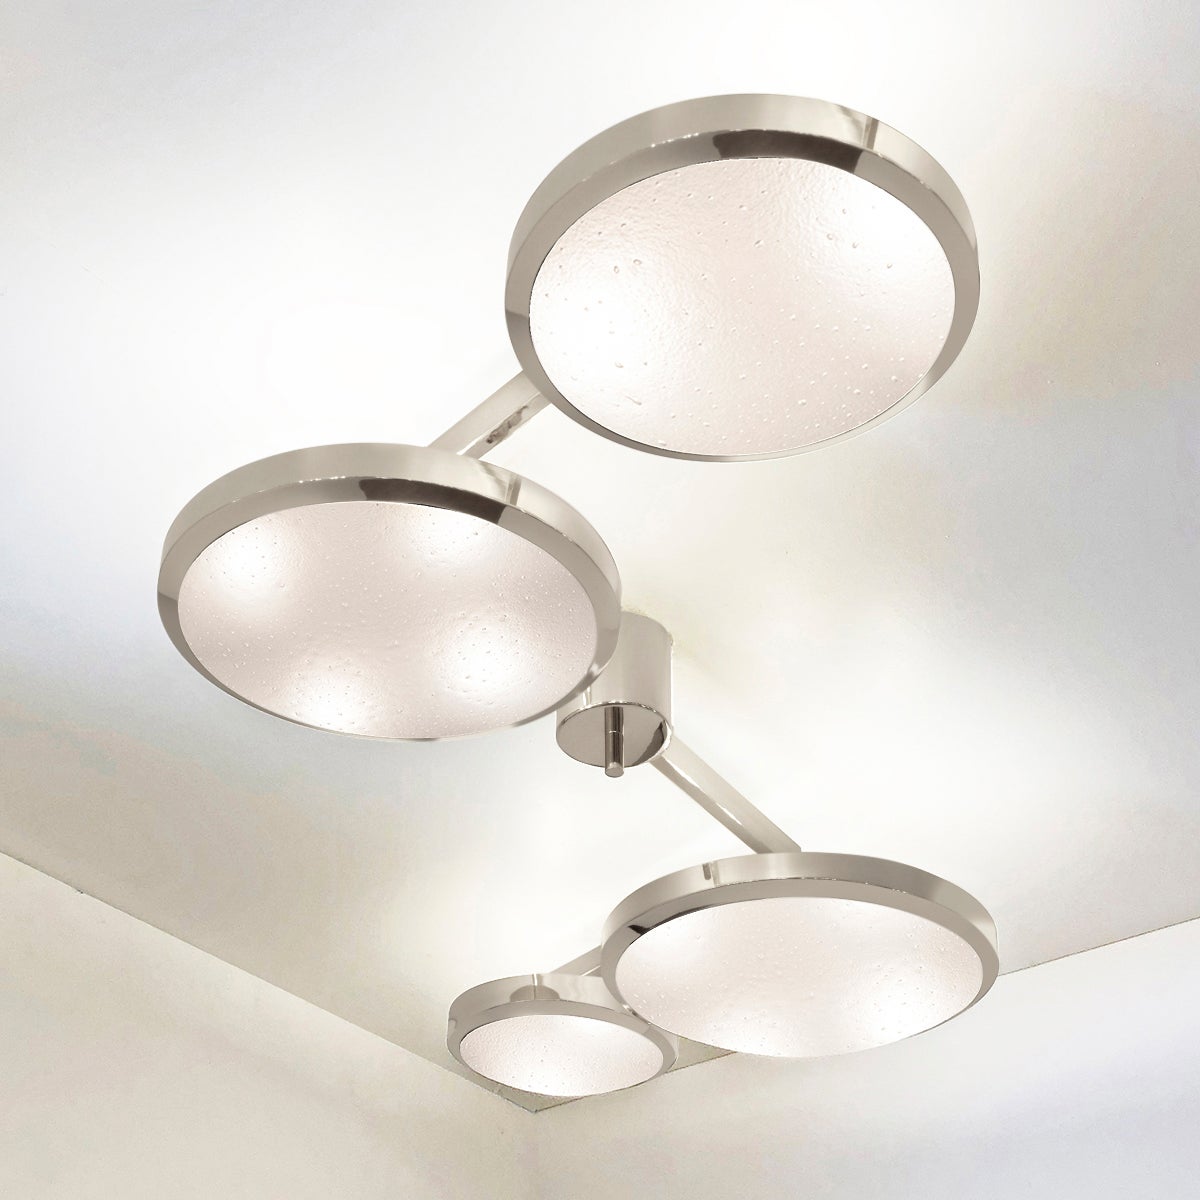 The Quattro ceiling light plays with the notion of lines and shapes, bringing the concept to life with its distinctive winding frame with four variable size shades at staggered heights. The first images show the fixture in our polished nickel